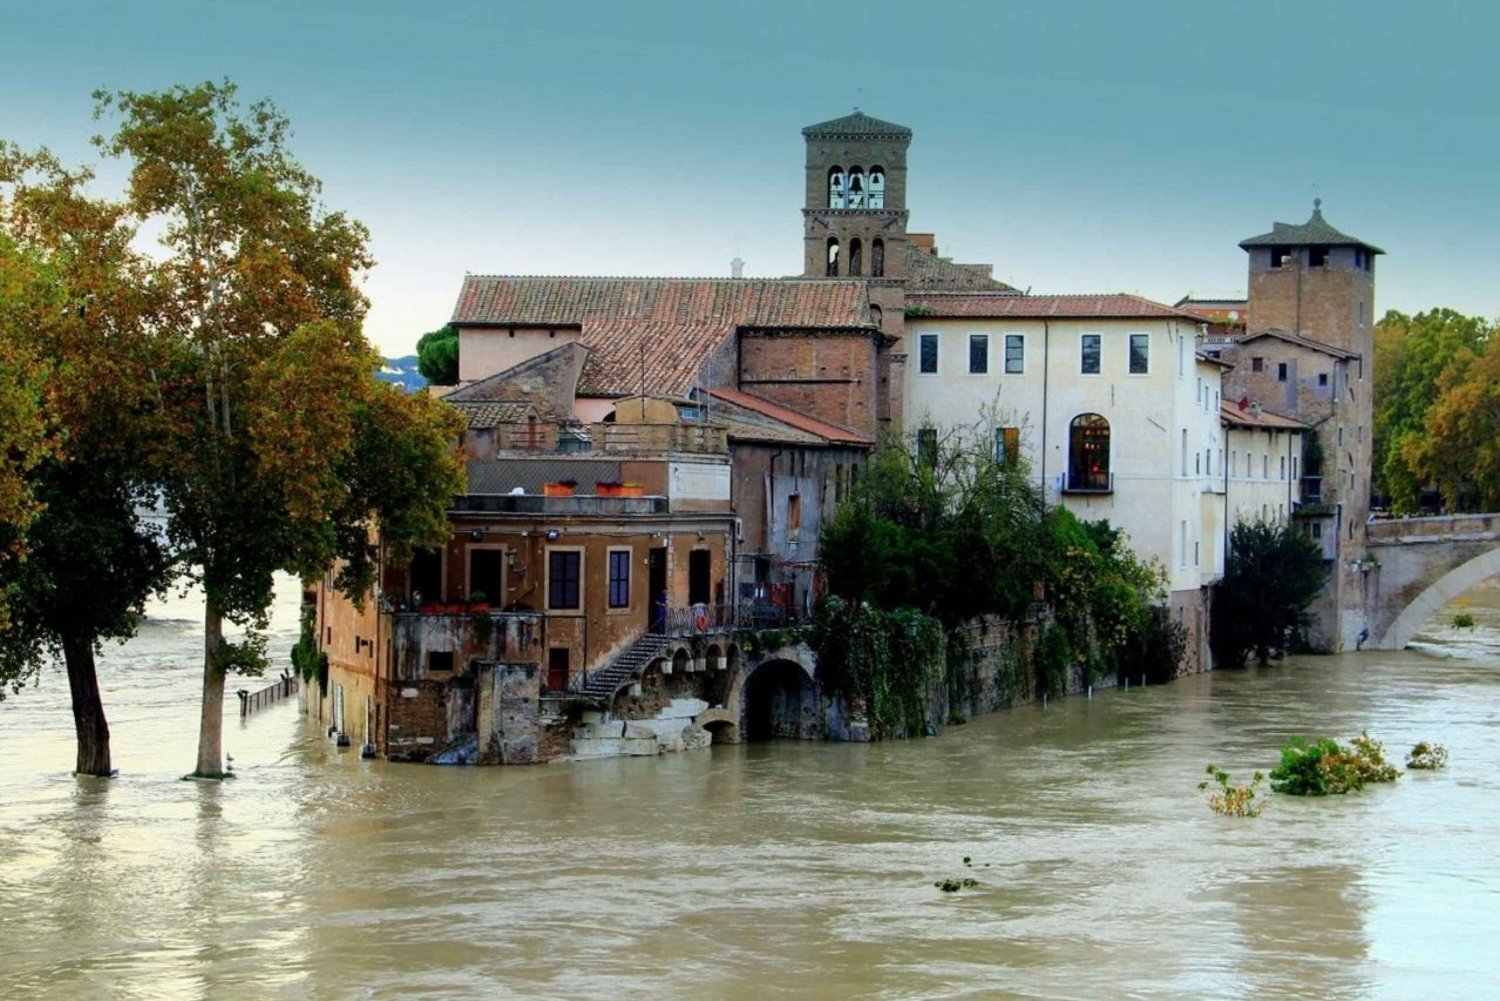 Rome: Urban Rafting Tour to Tiber Island with A Local Pizza